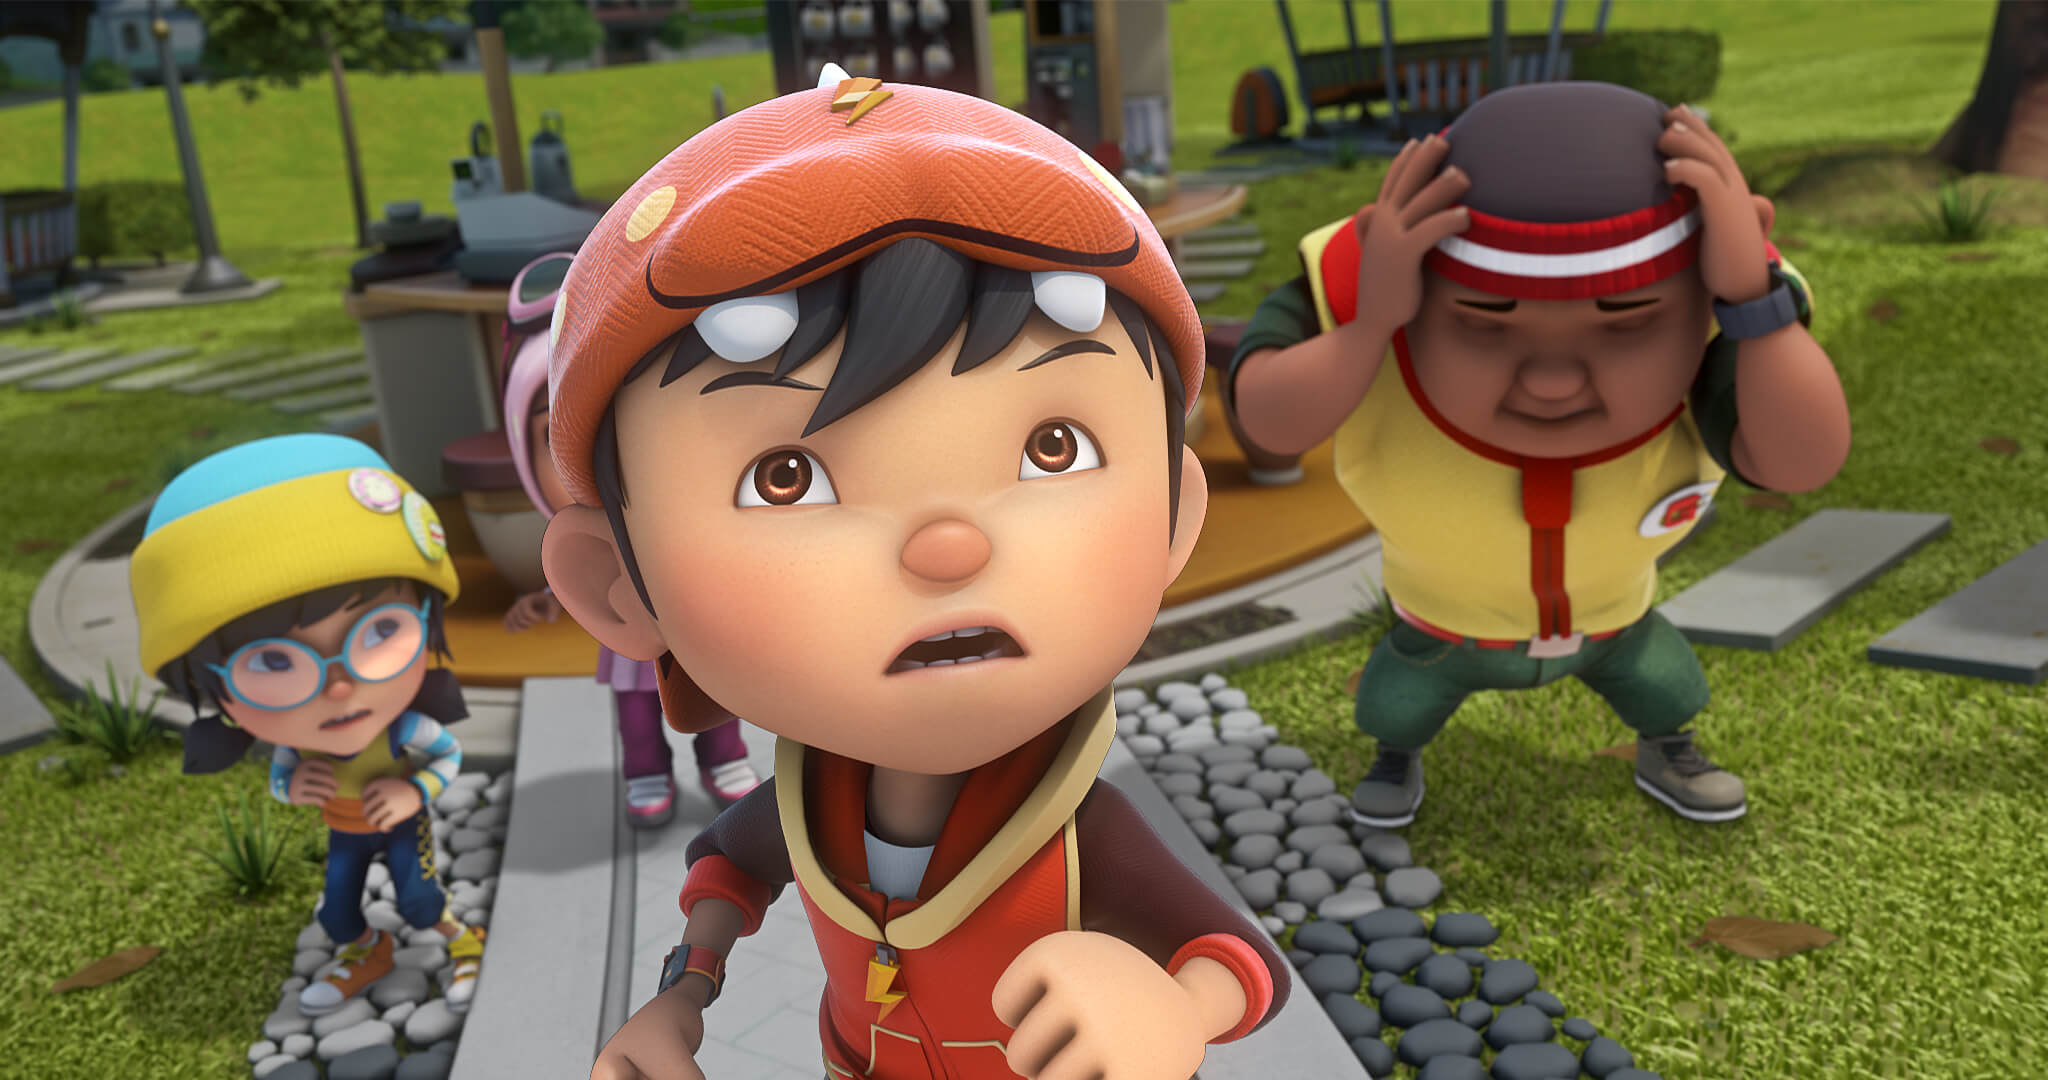 Watch BoBoiBoy  The Movie on Monsta YouTube Channel in Full 